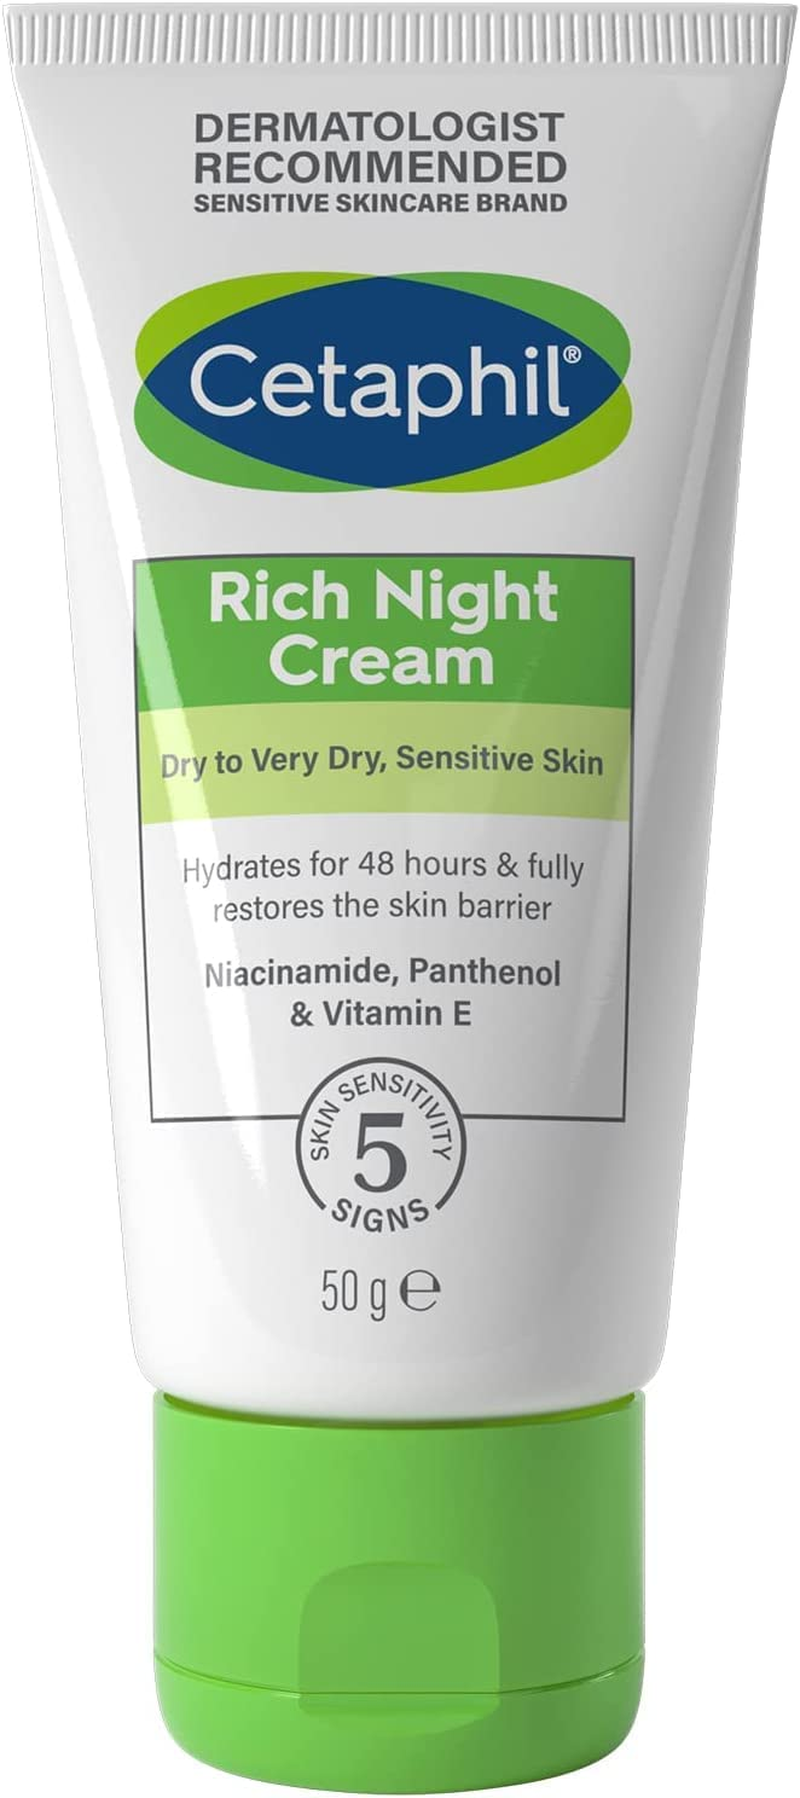 rich night cream, 50g, for dry to very dry, sensitive skin, with niacinamide